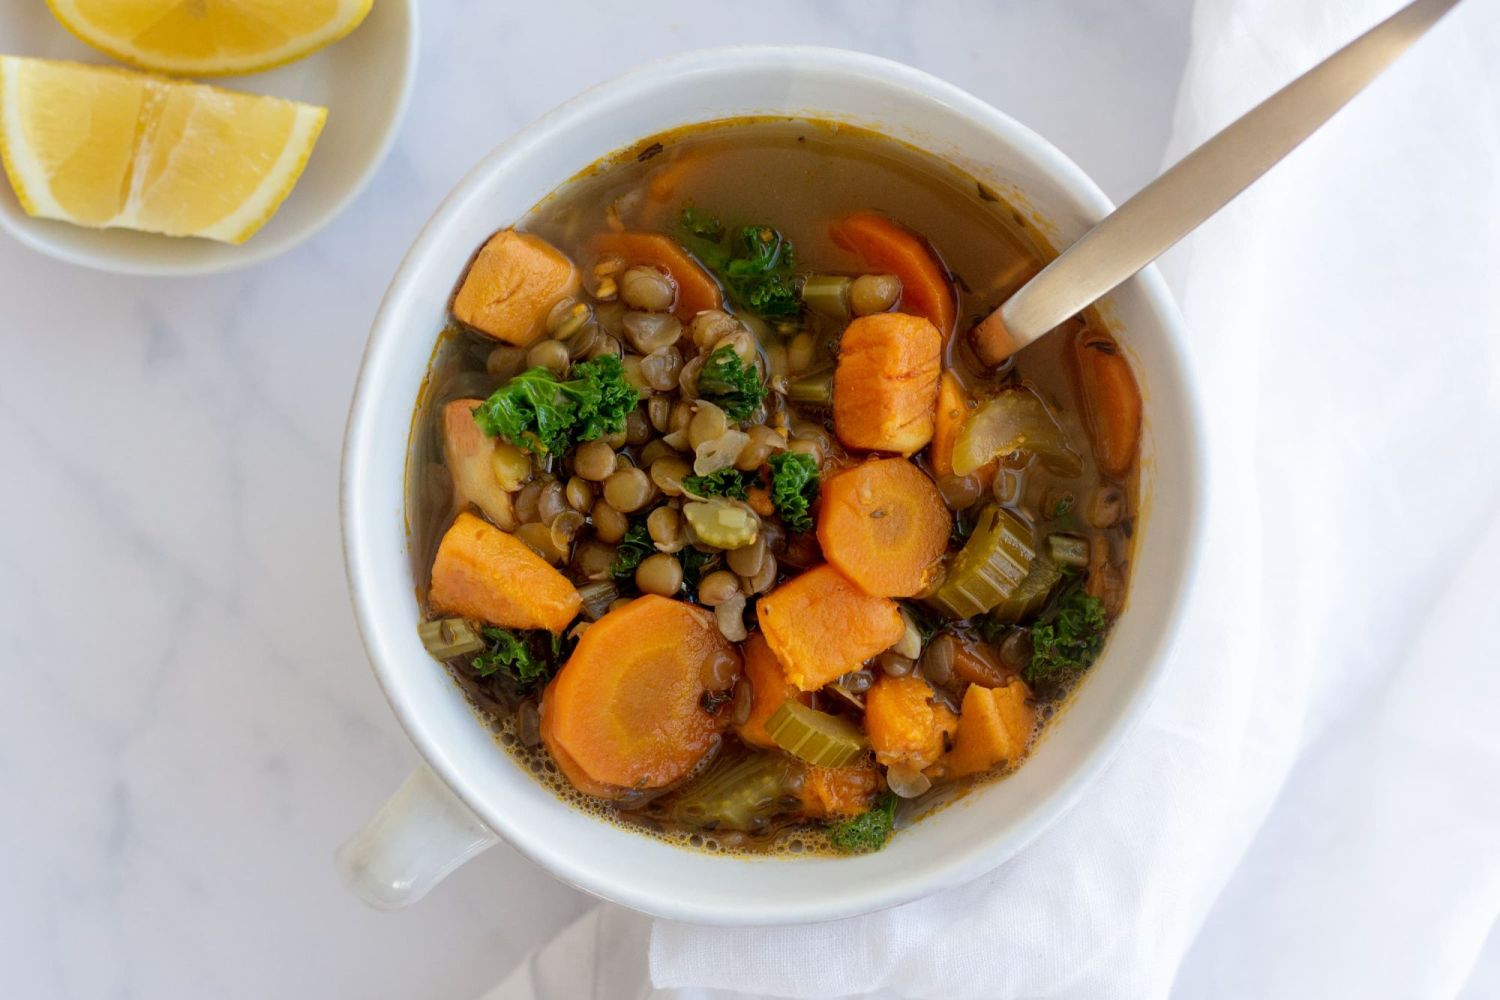 Lentil and vegetable soup in a white bowl with carrots, sweet potato, kale, lentils, and celery with a metal spoon and lemon slices.